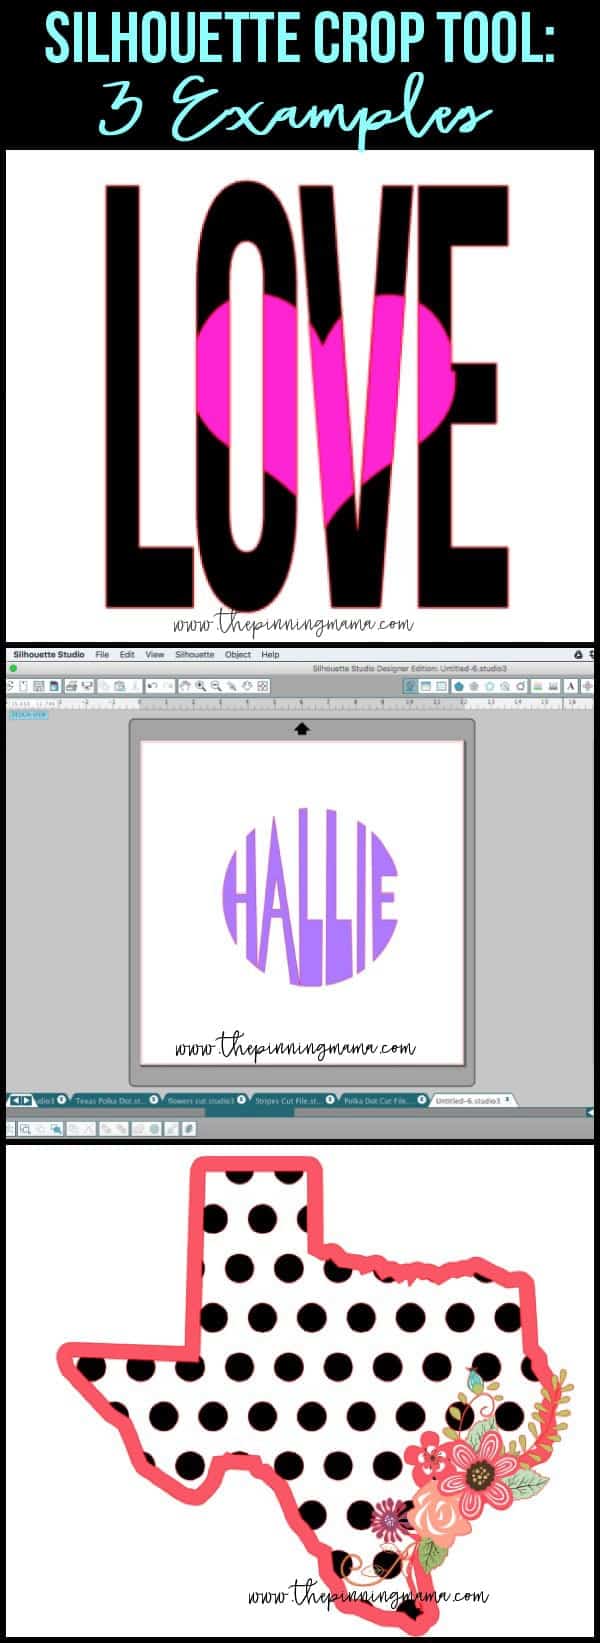 4 AWESOME ways to use the SIlhouette Crop tool!!! Learn how to design any craft you can imagine in the Silhouette Studio software!